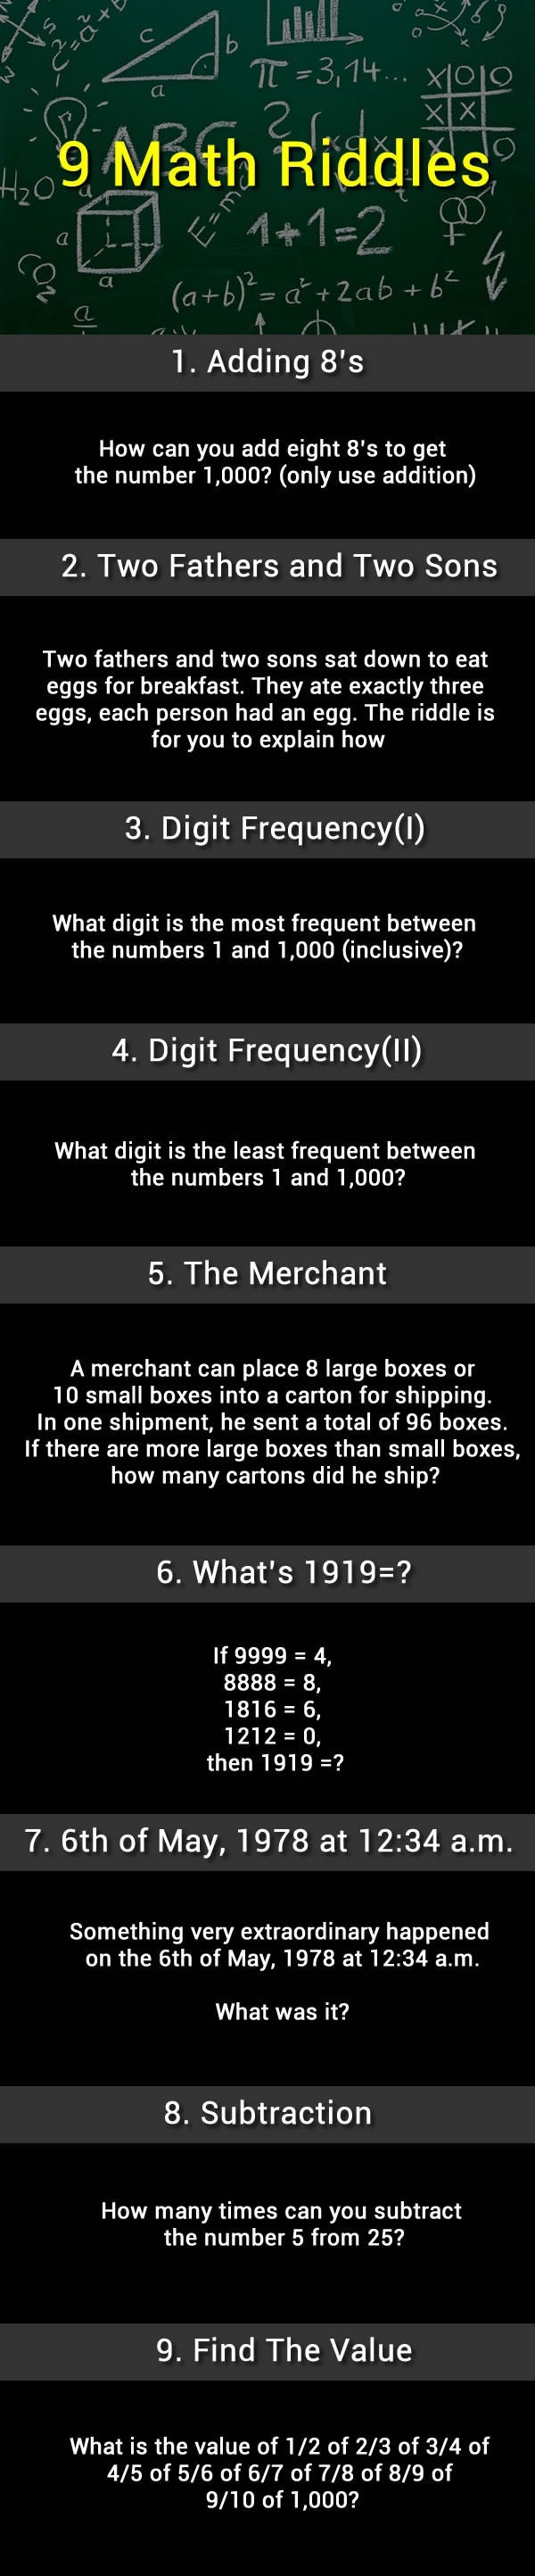 9 math riddles, can you solve them?